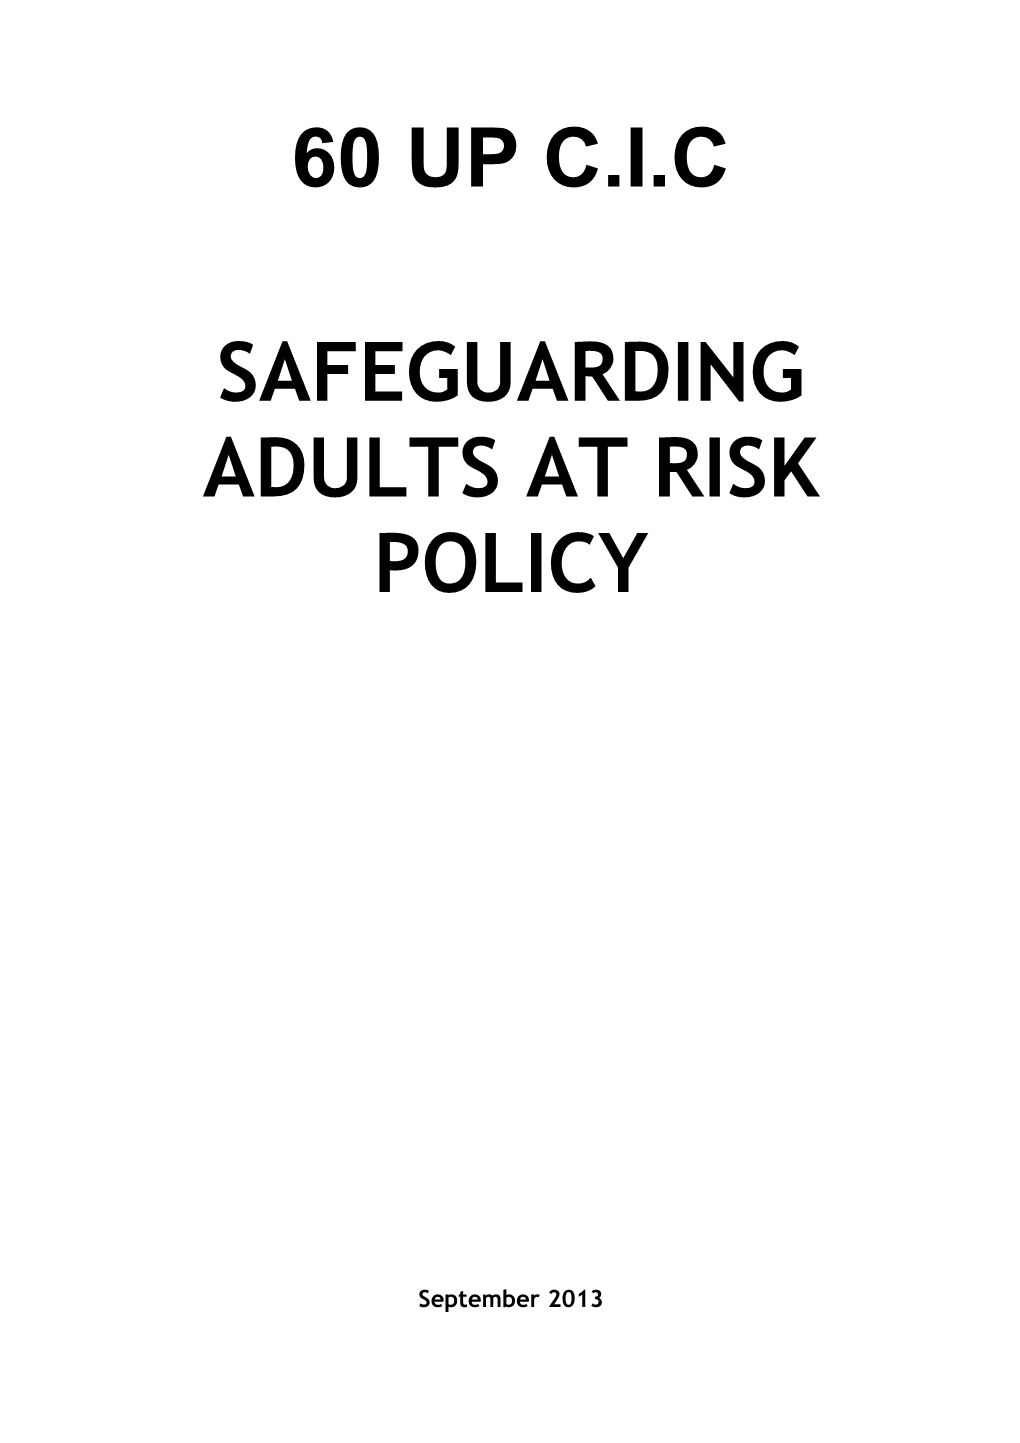 Safeguarding Adults at Risk Policy